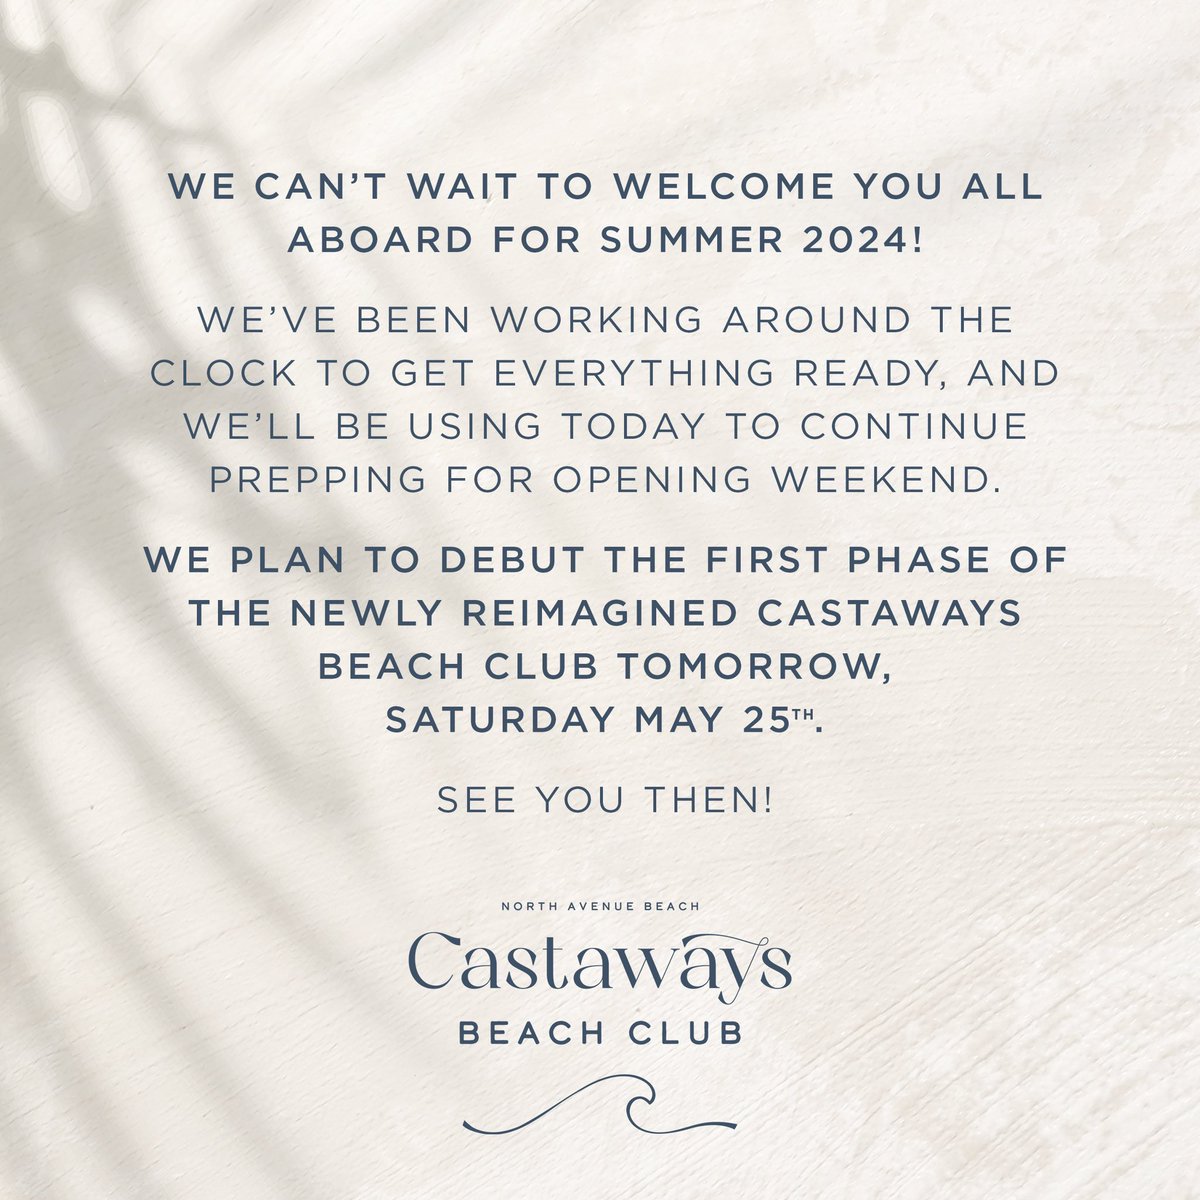 We are hard at work getting everything ready for the weekend! Join us tomorrow as we debut the first phase of the newly reimagined Castaways Beach Club ✨🏝️😎